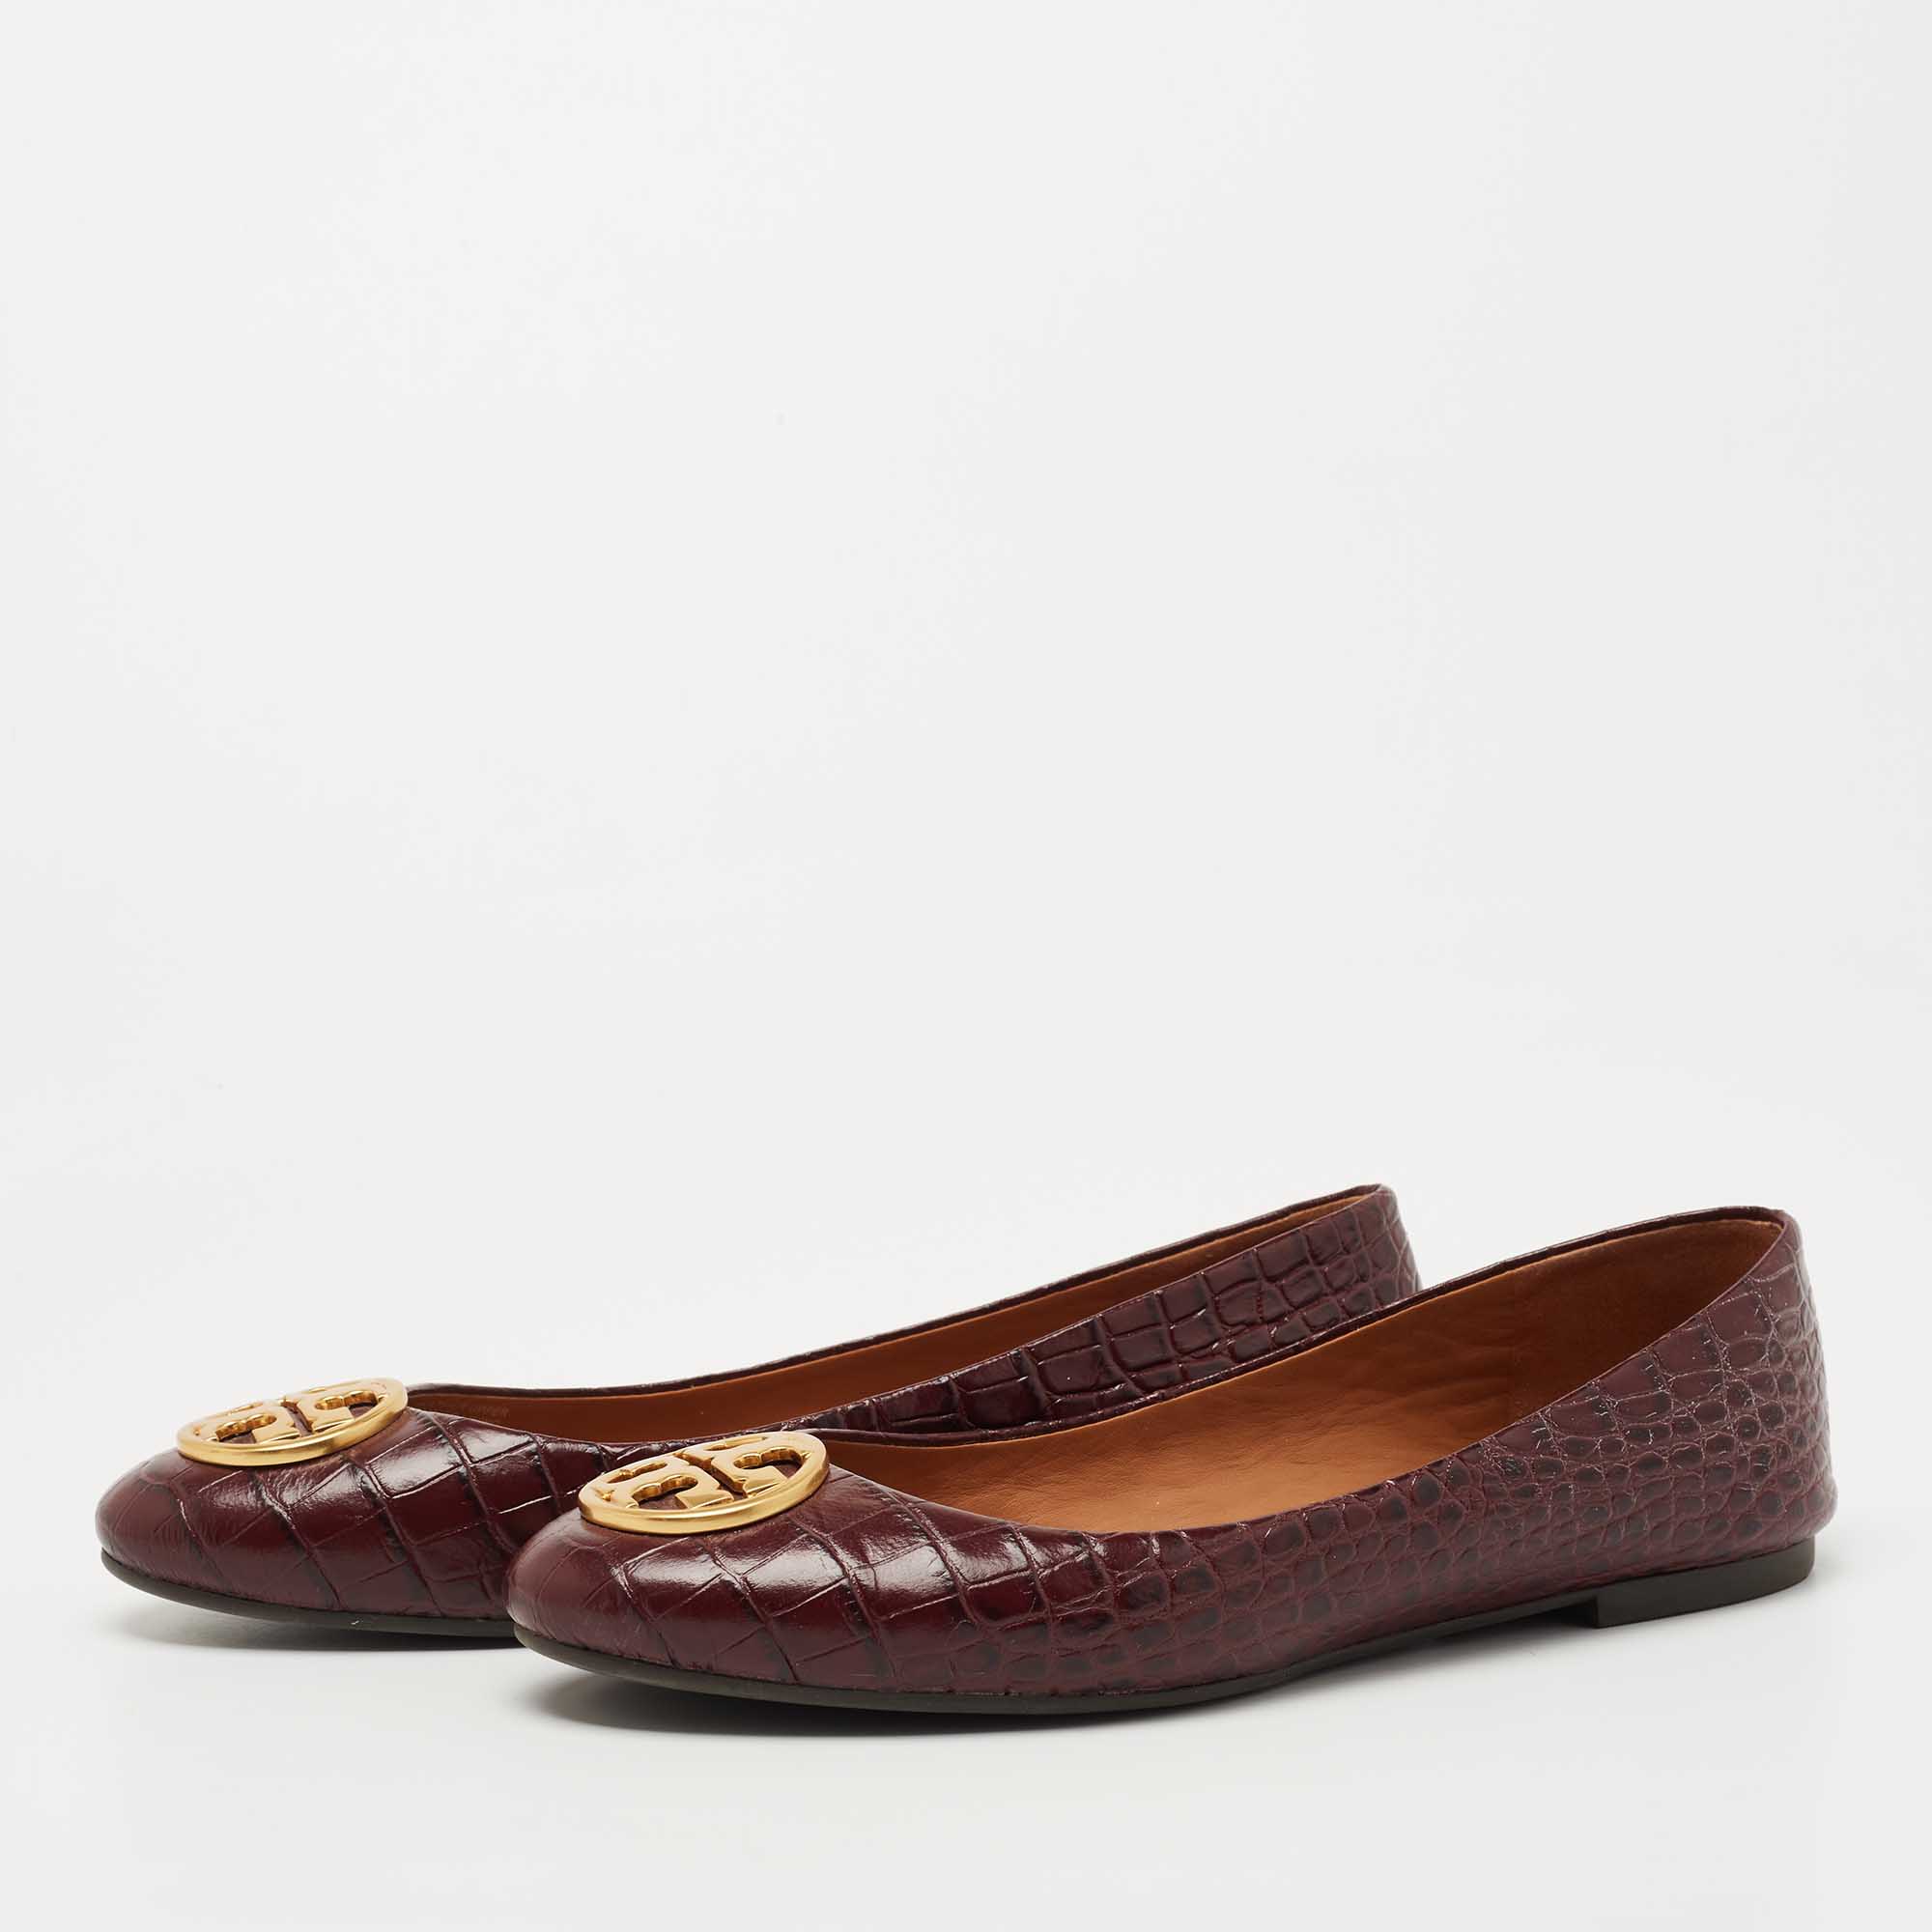 

Tory Burch Burgundy Croc Embossed Leather Chelsea Ballet Flats Size